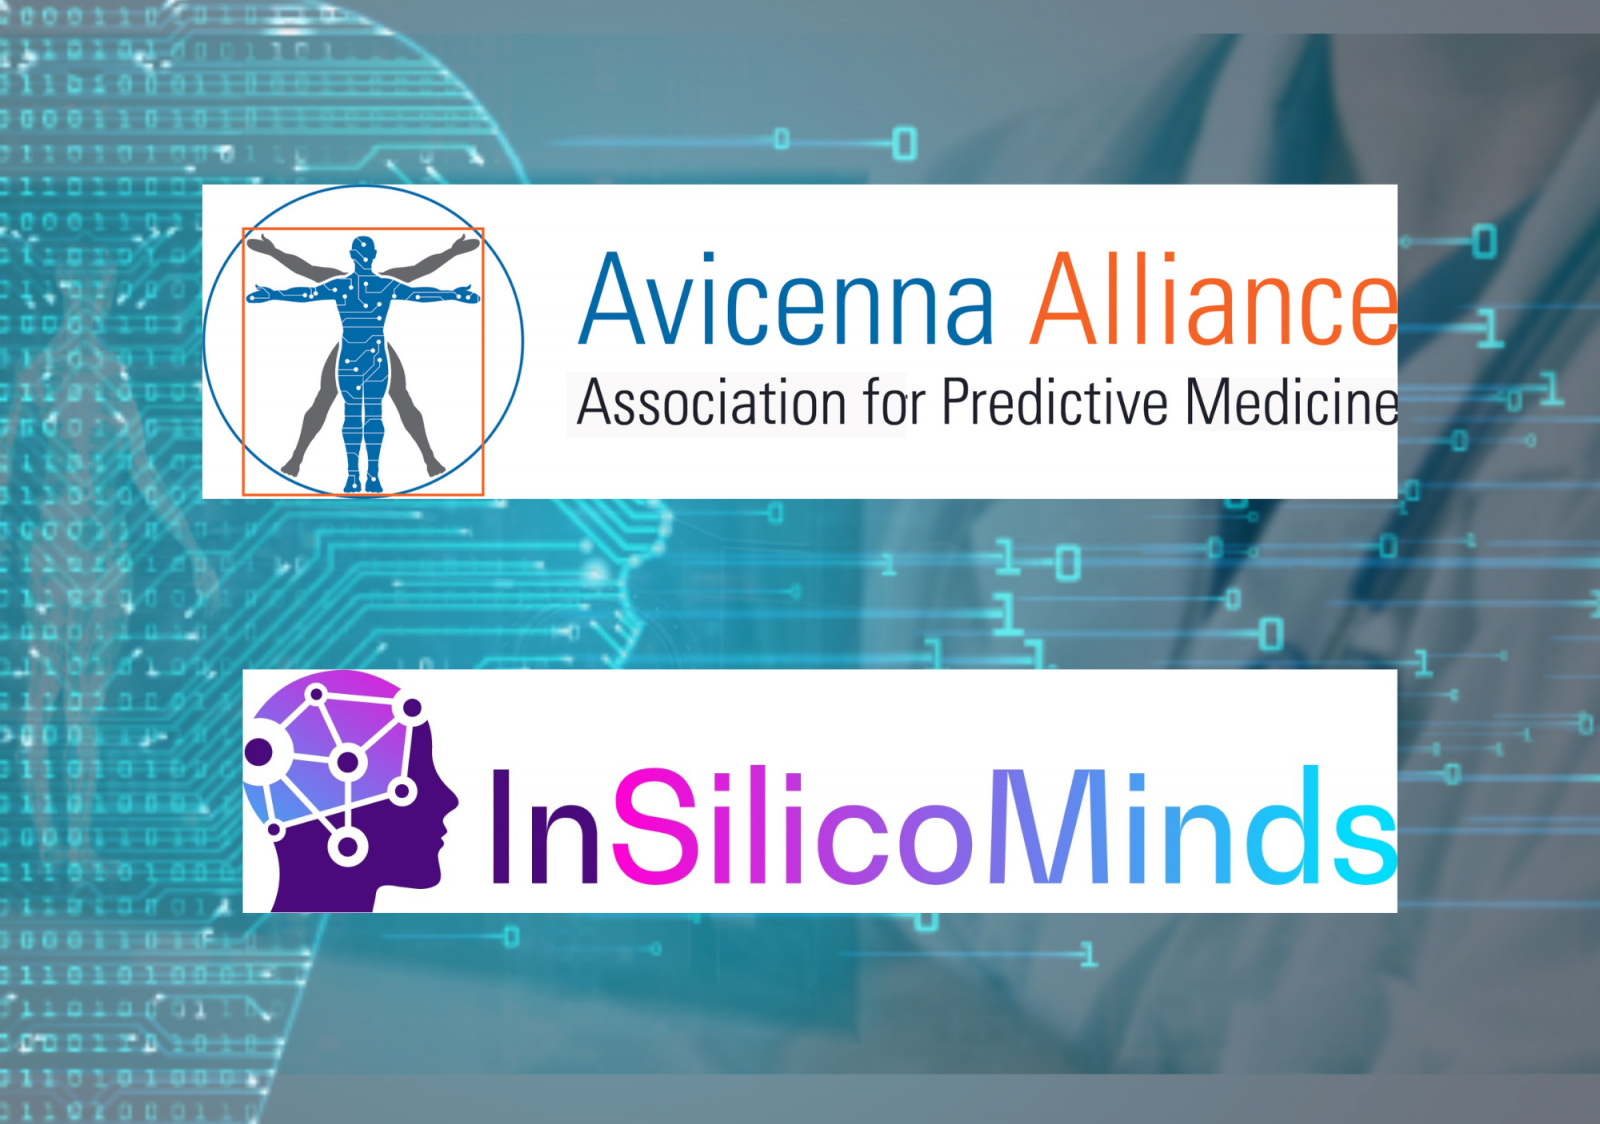 InSilicoMinds is a new Avicenna member!